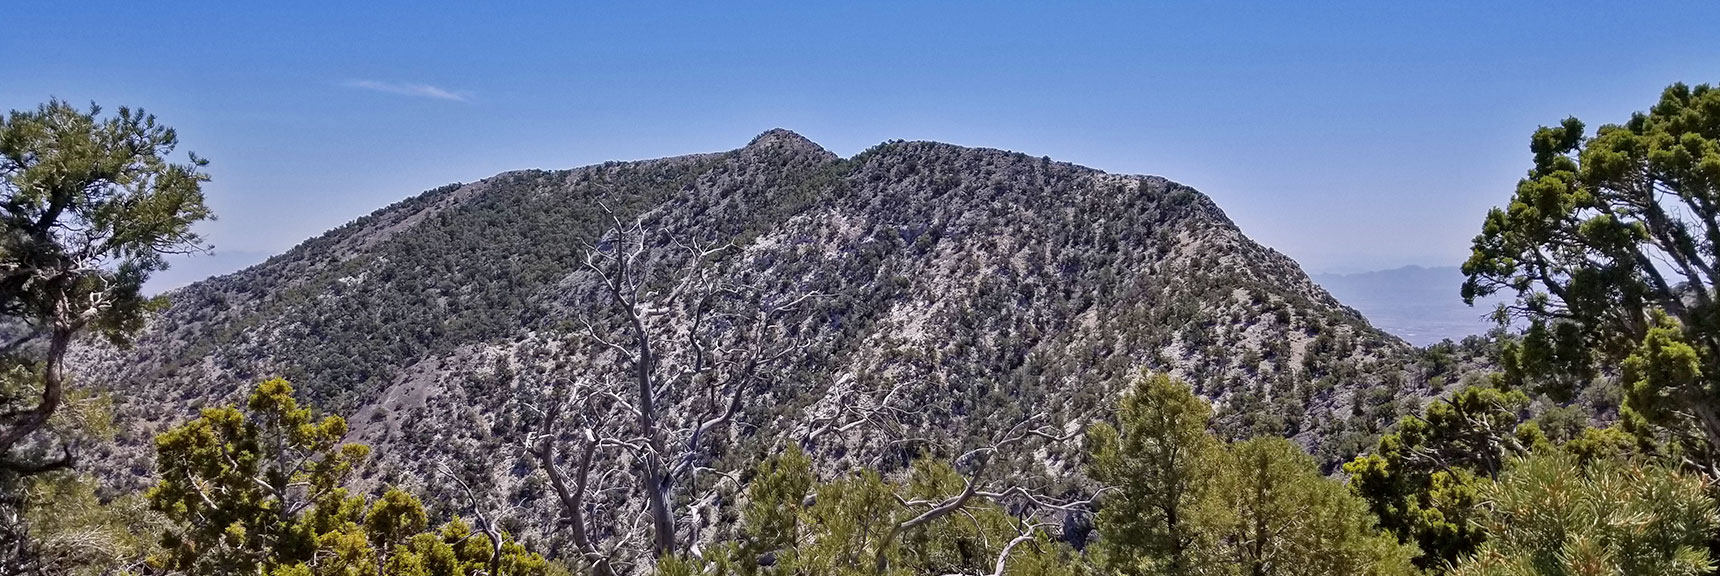 North Western View of El Padre Mountain, La Madre Mountains Wilderness, Nevada